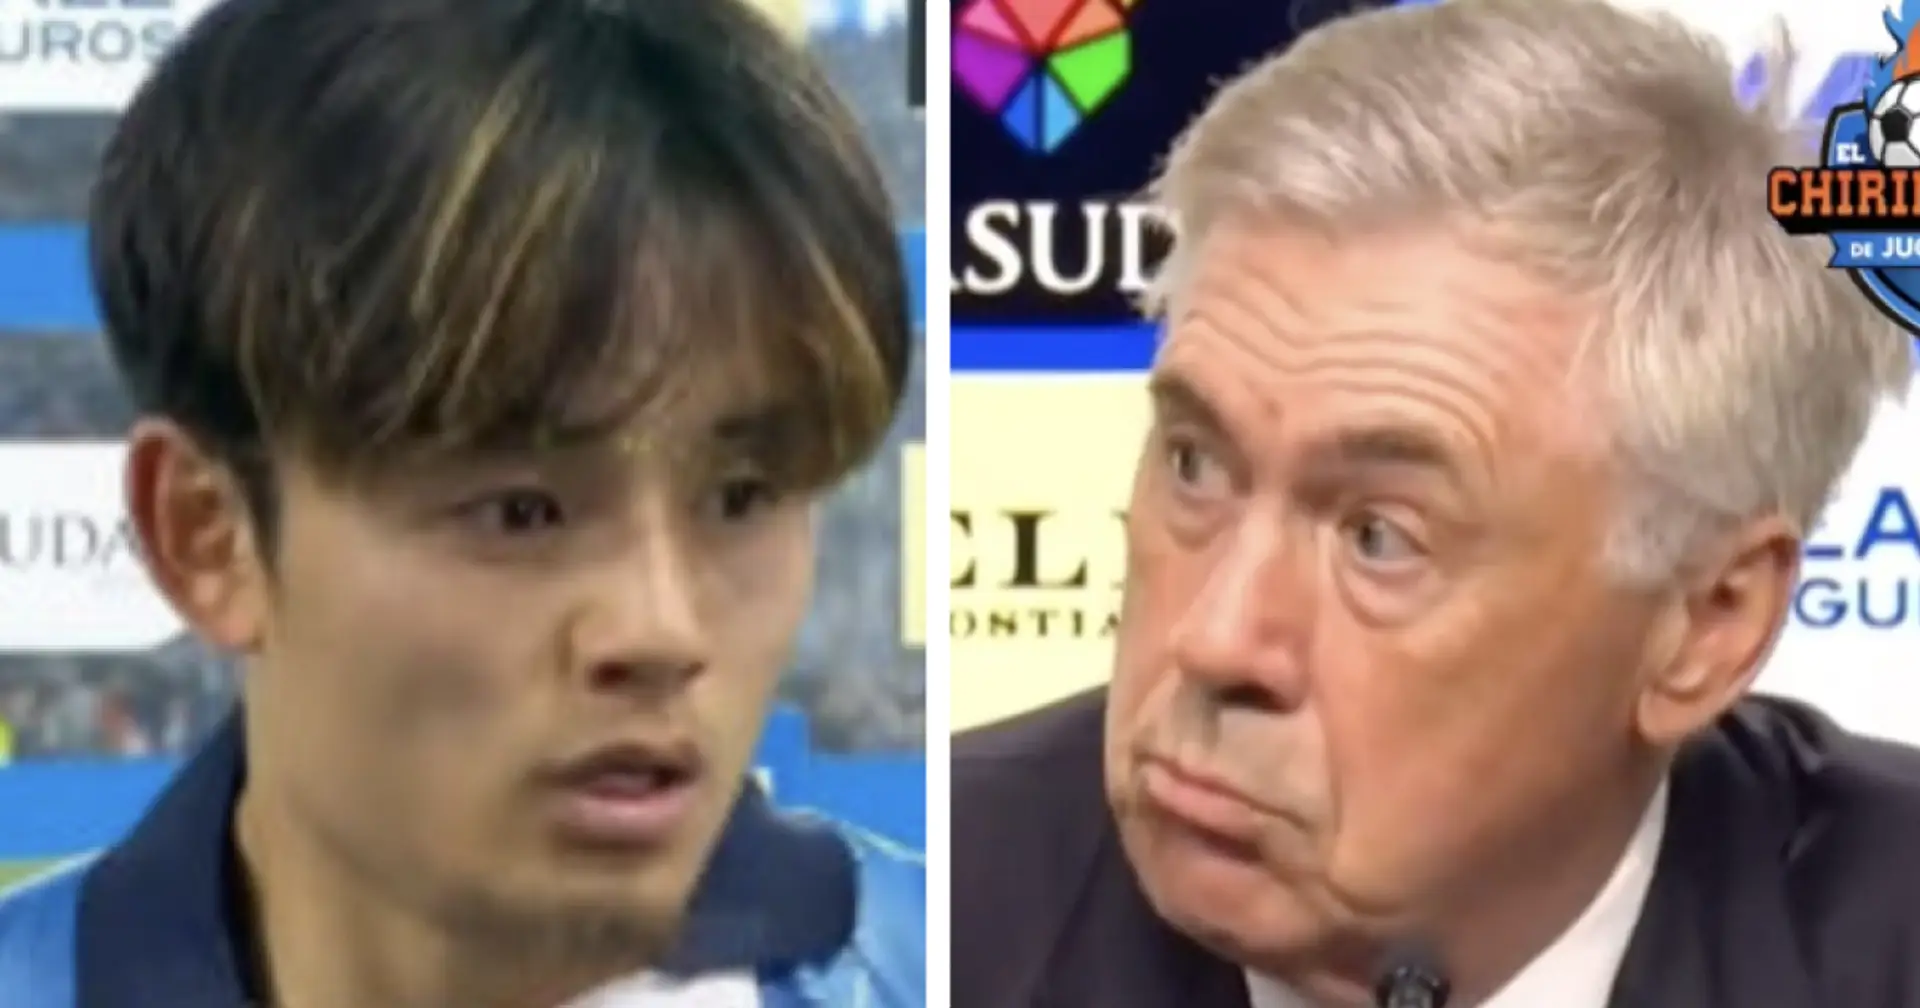 'They don't ask for that in the Champions League': Takefusa Kubo ROASTS Real Madrid after loss